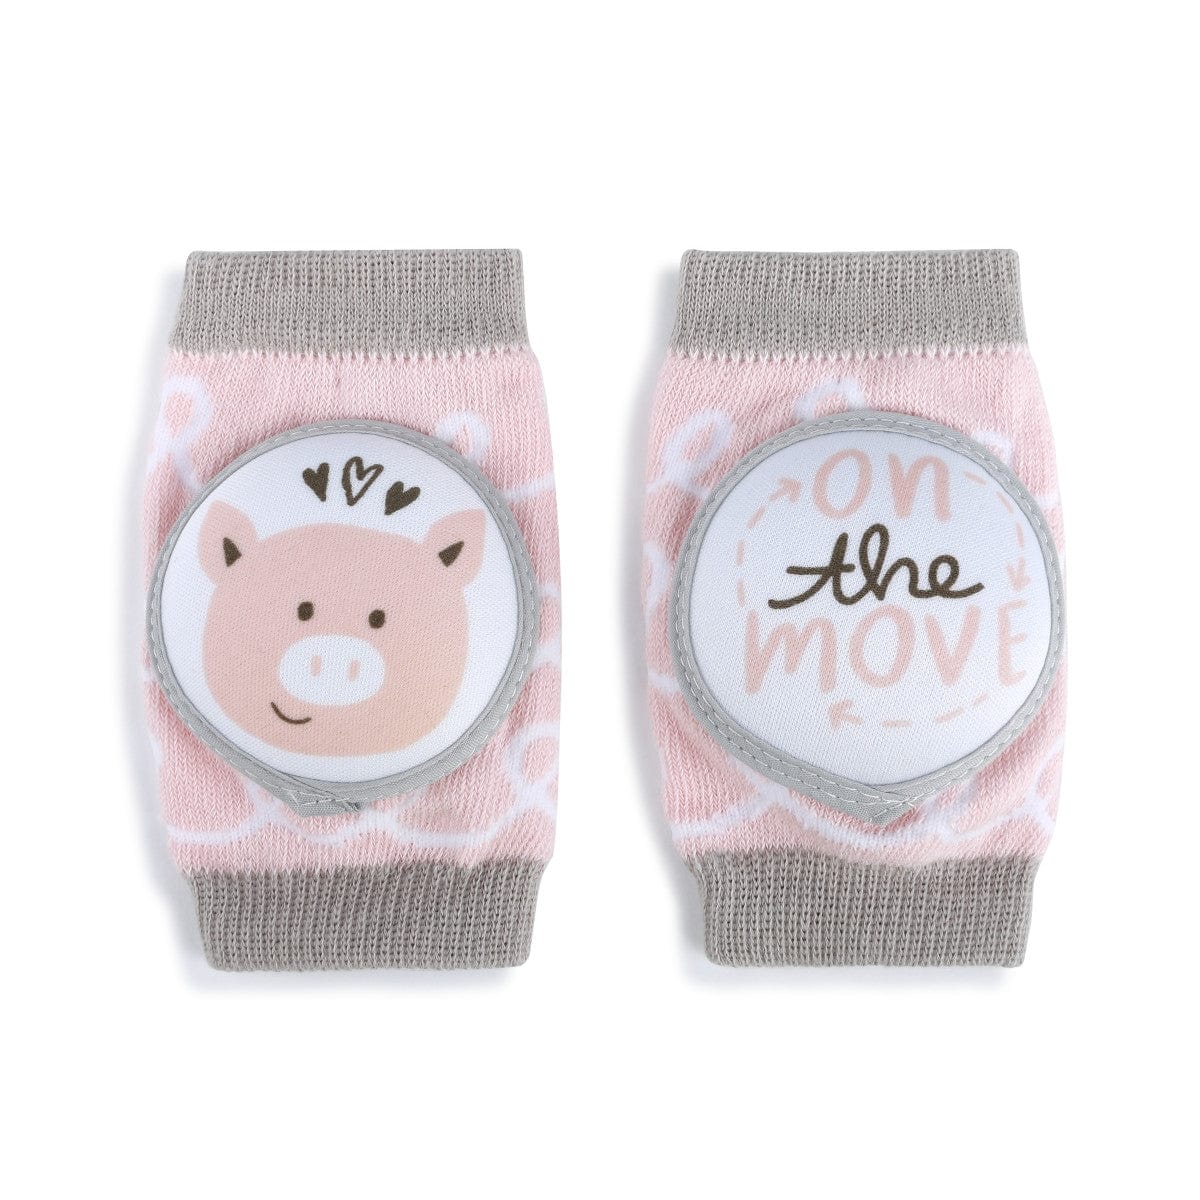 Cute Baby Knee Protectors-Kneezies! Little Piggy Knee Protectors for Babies - The Pink Pigs, A Compassionate Boutique